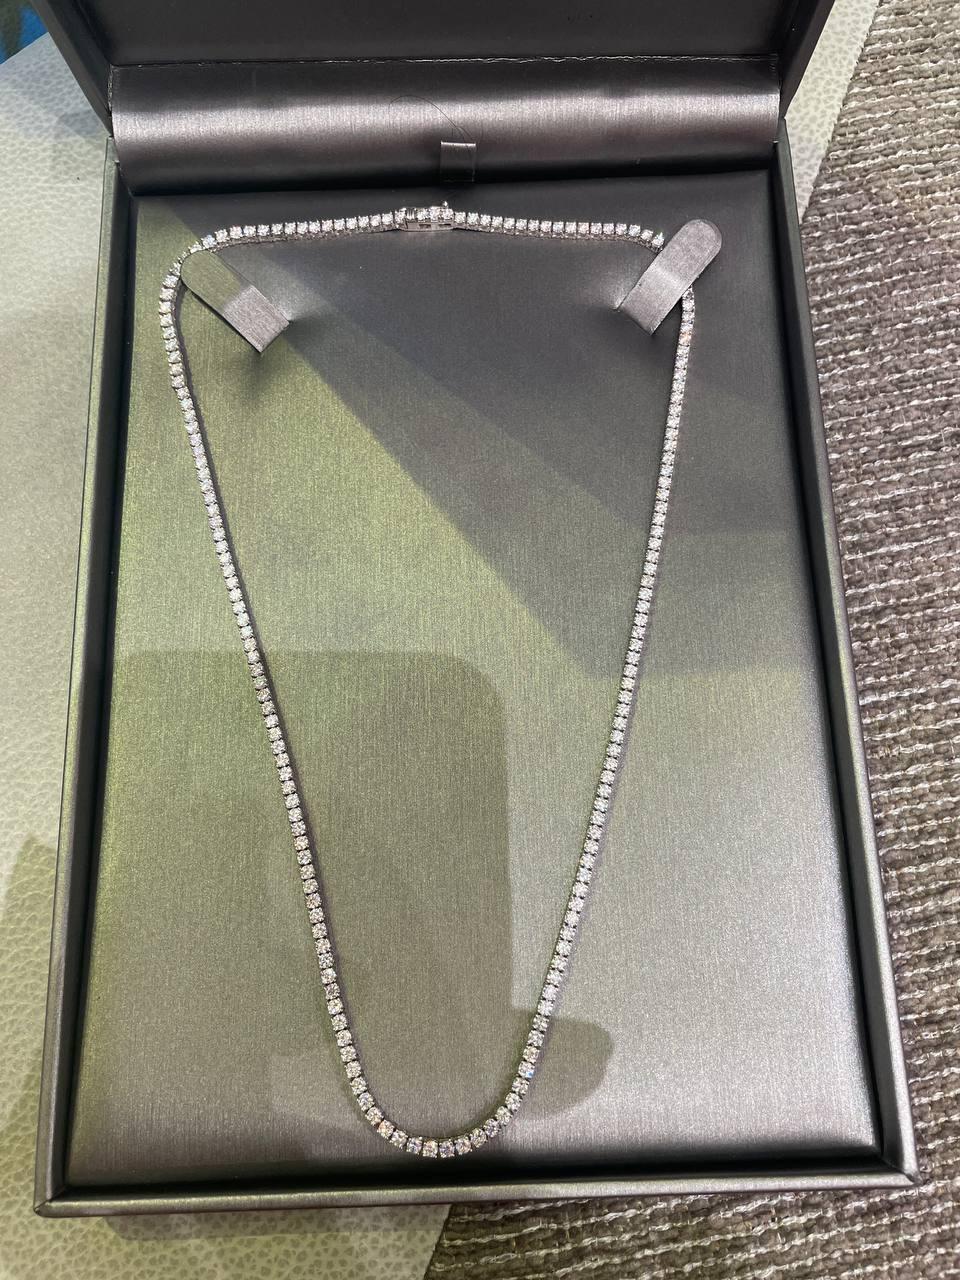 An Amazing Estate Diamond Handmade 14k White gold (stamped) Tennis Necklace with over 180 Round Brilliant Diamonds in G-H-I color, SI clarity over all. Estimated total weight of the diamonds is 7.60ctw. 
The length of the necklace is 18 inches;